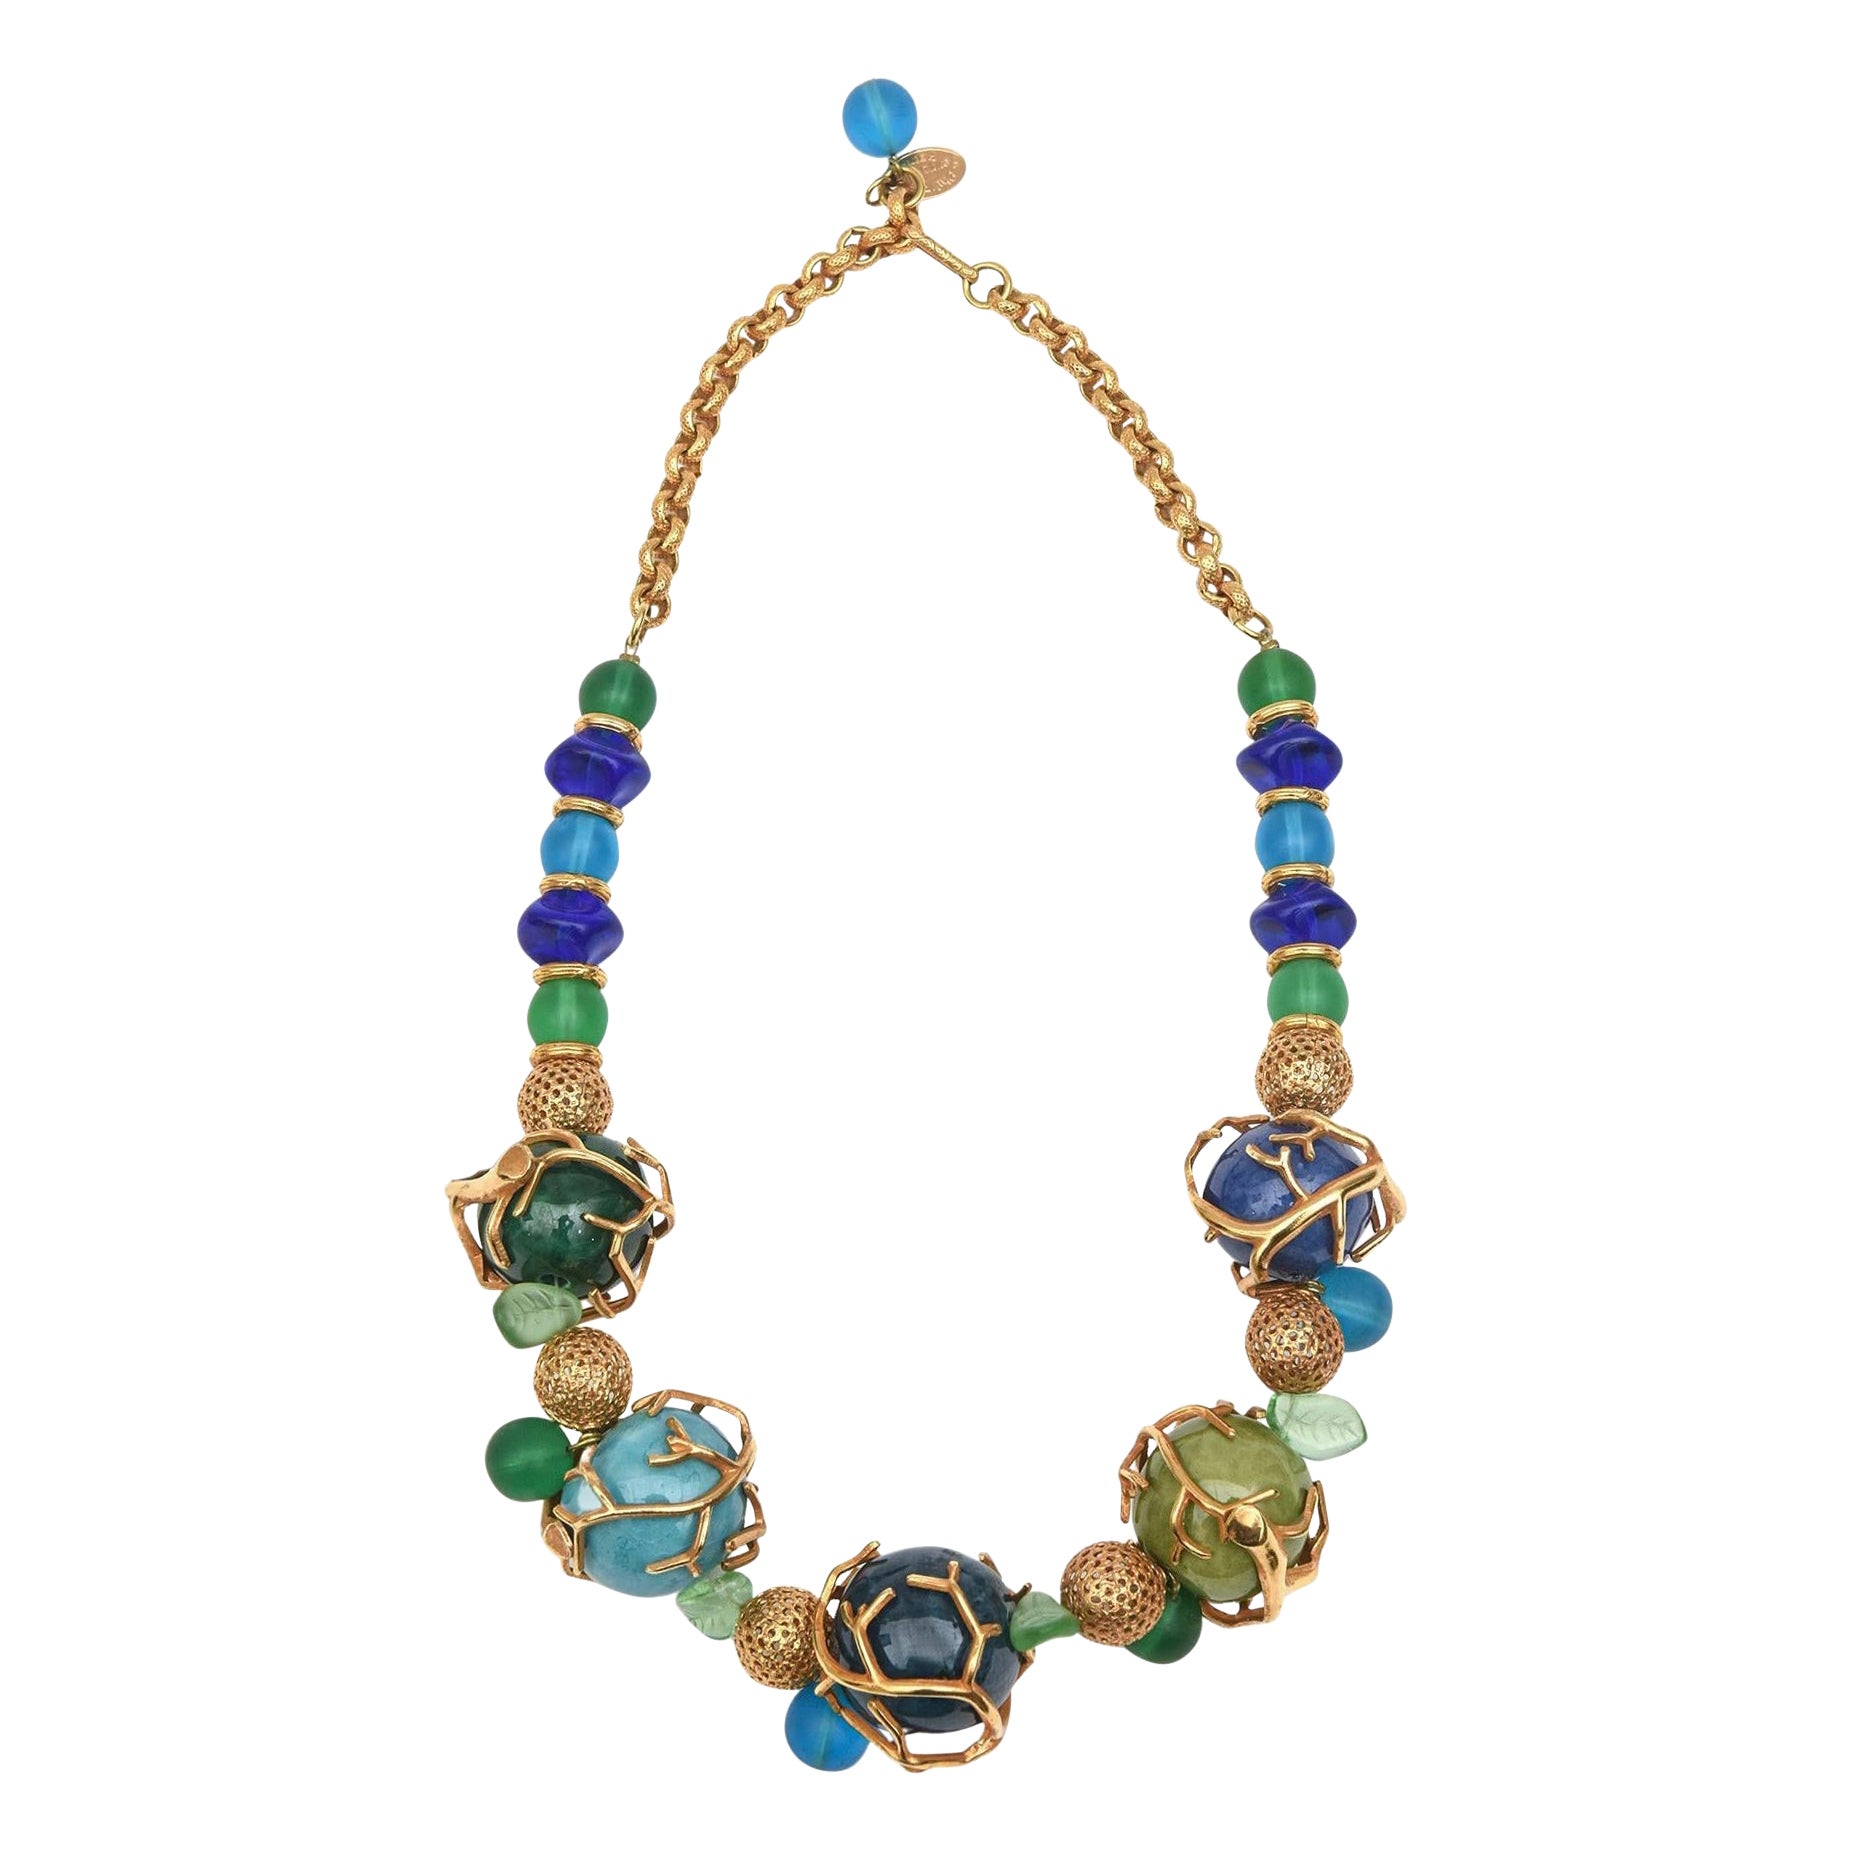  Philippe Ferrandis Signed Glass, Resin and Gold Plated Beaded Necklace French For Sale